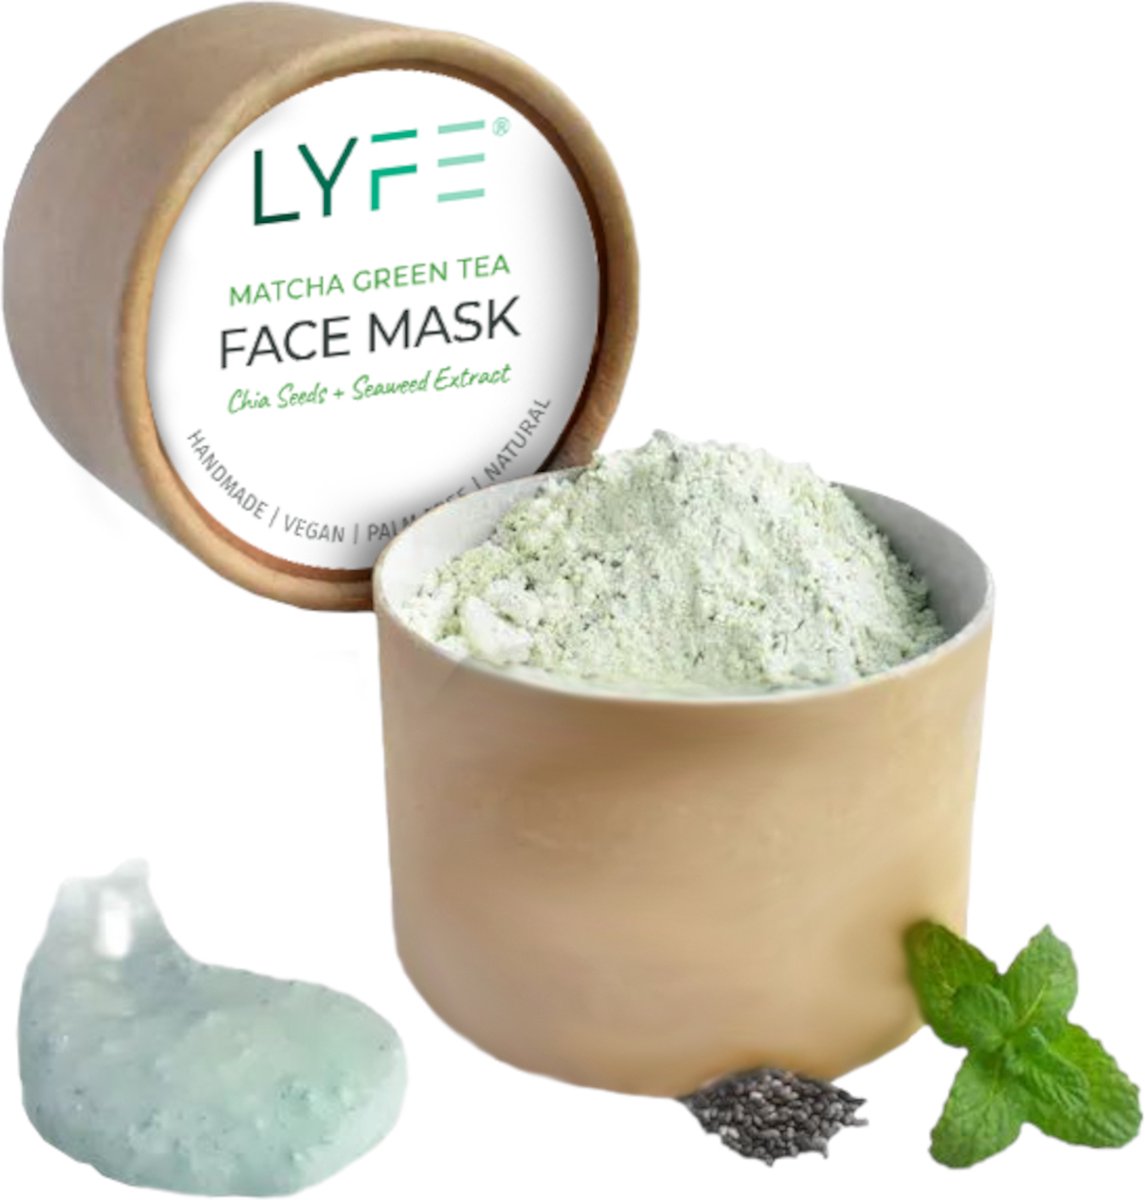 LYFE Matcha Green Tea Face Mask Beauty Natural Antioxidant with Chia seeds and Sea Weed Extract, Rejuvenating, Hydrating and Toning. Vegan Luxury 45 gram Powder Eco-pack